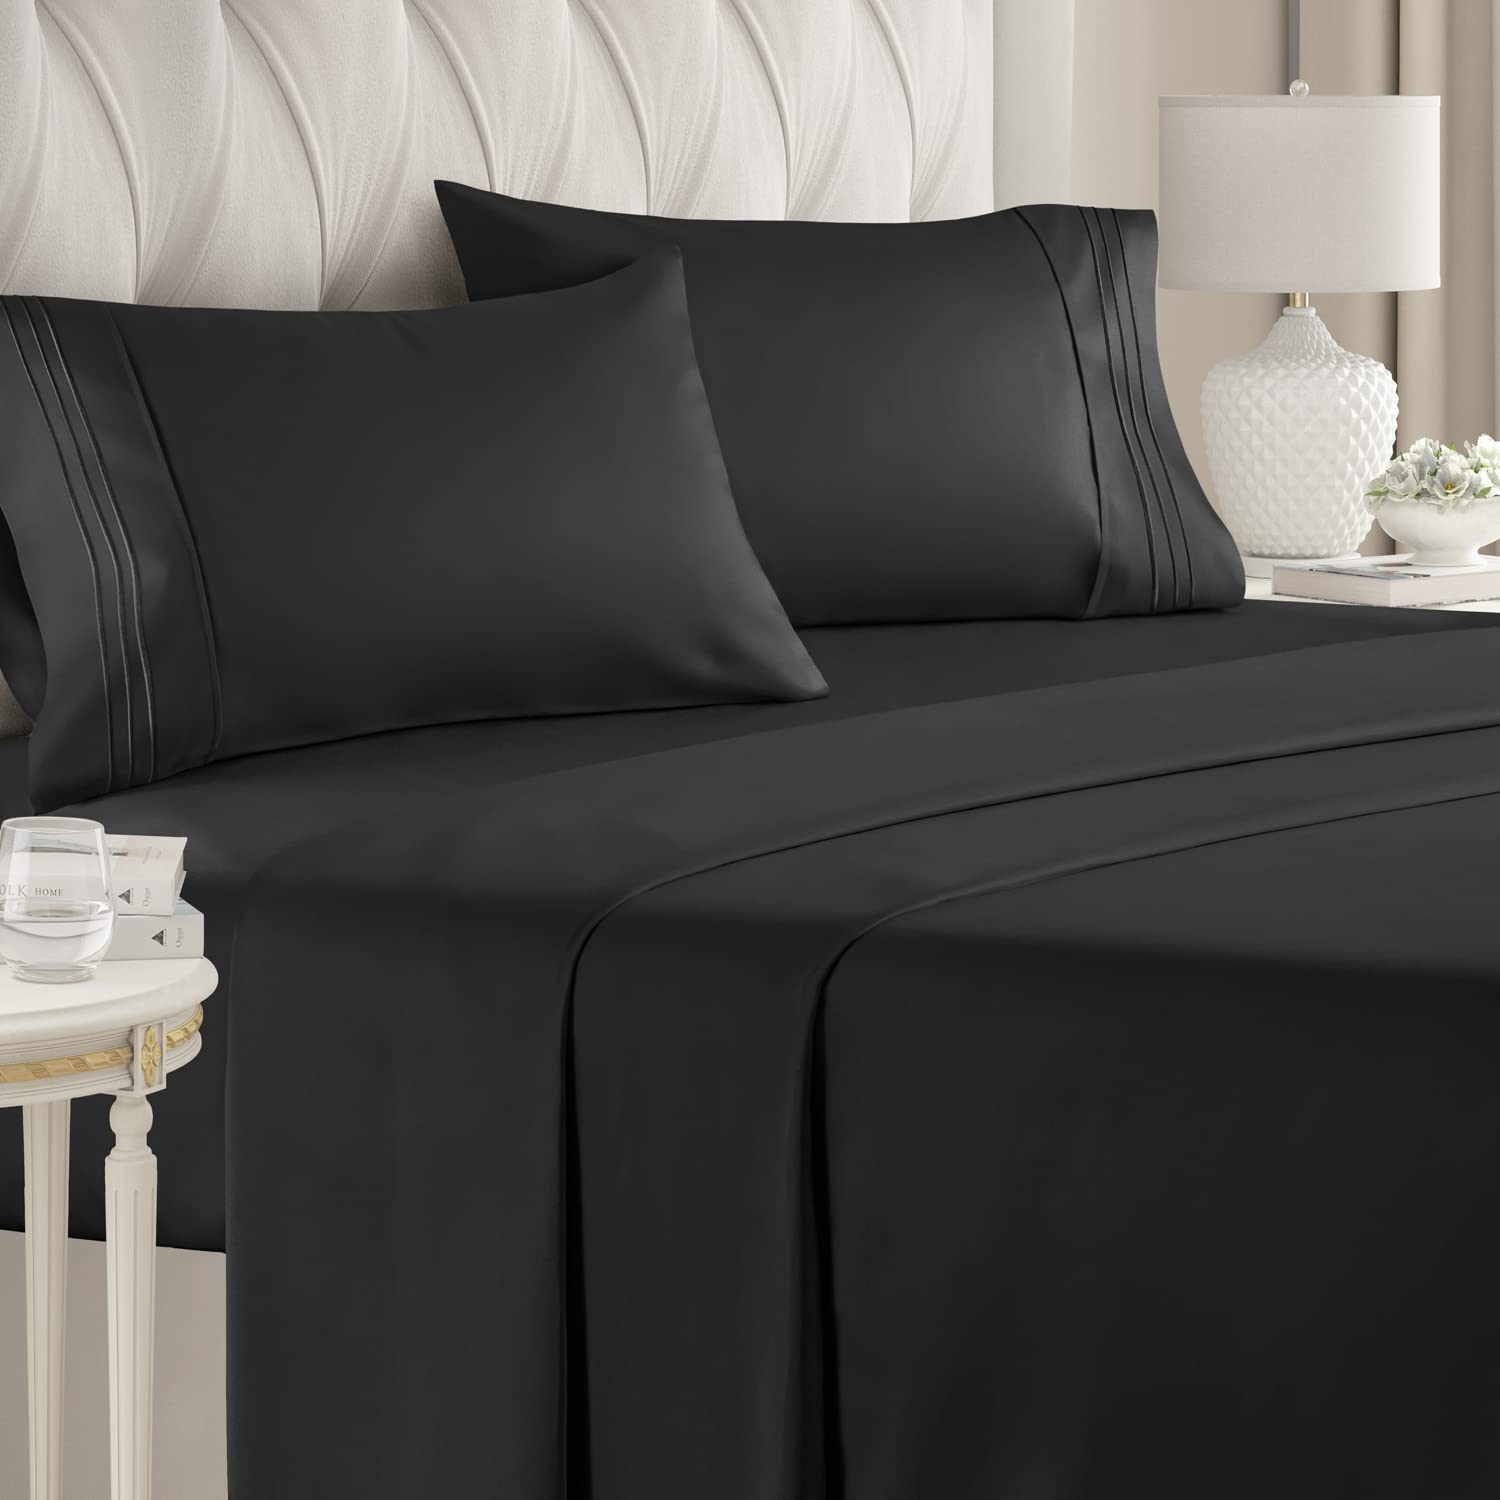 Book Cover Full Size Sheet Set - Breathable & Cooling Sheets - Hotel Luxury Bed Sheets - Extra Soft - Deep Pockets - Easy Fit - 4 Piece Set - Wrinkle Free - Comfy - Black Bed Sheets - Fulls Sheets - 4 PC 24 - Black Full